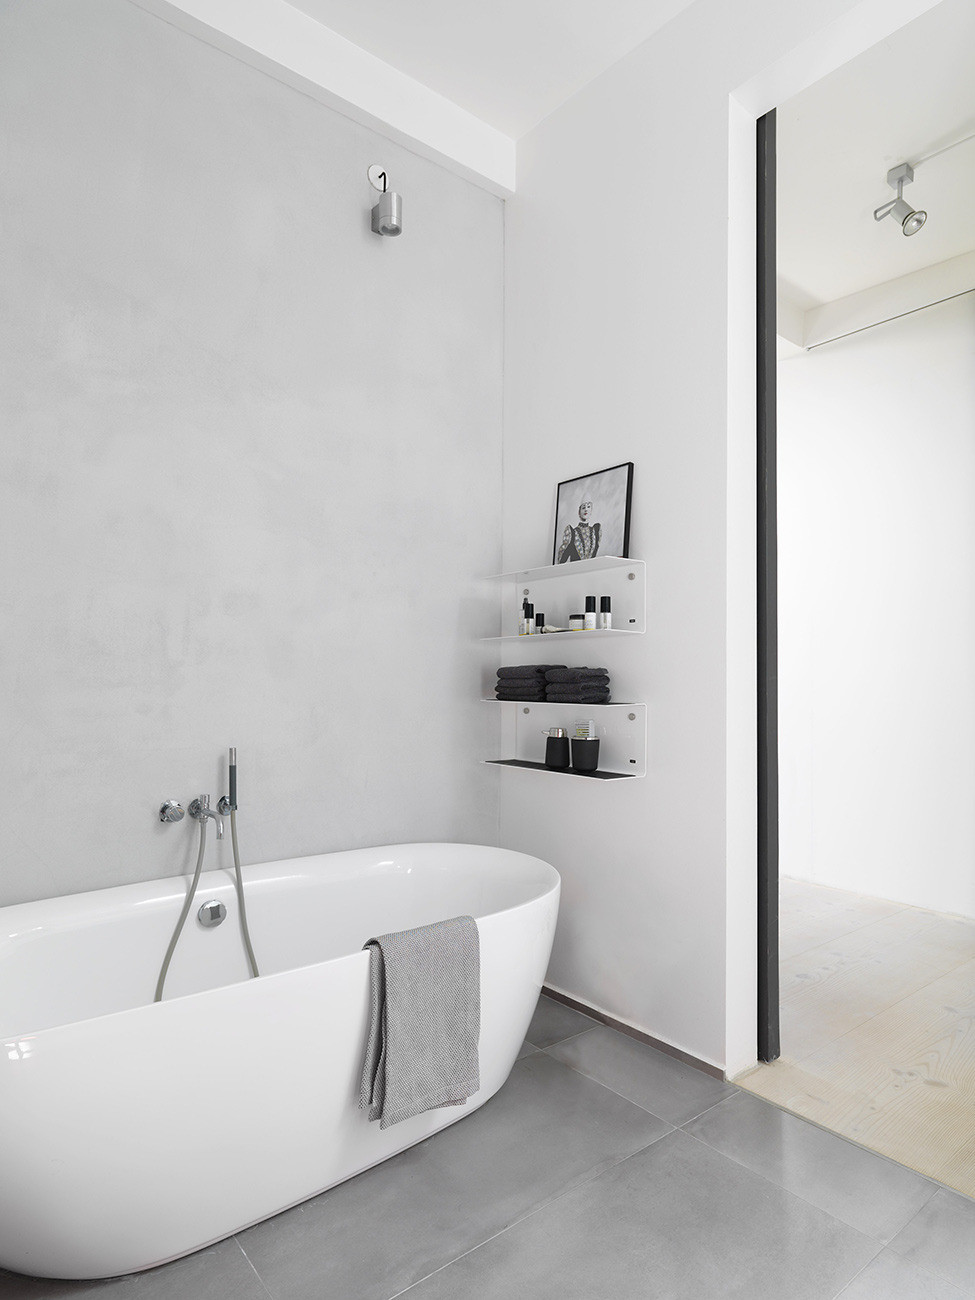 almost pure white bathroom with minimalist looking open shelving